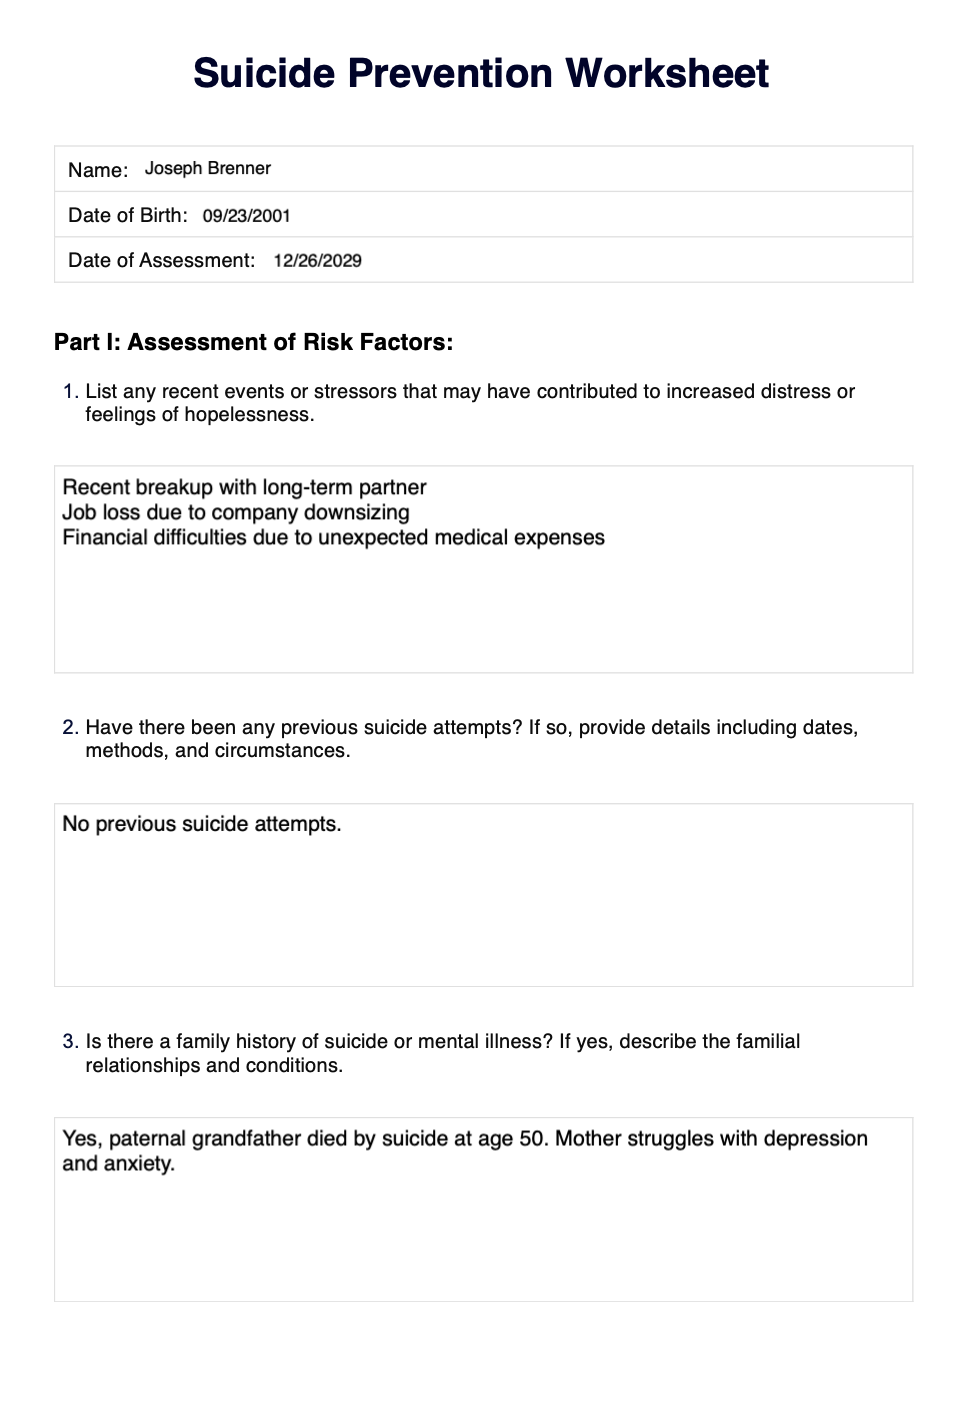 Suicide Prevention Worksheets Example Free PDF Download